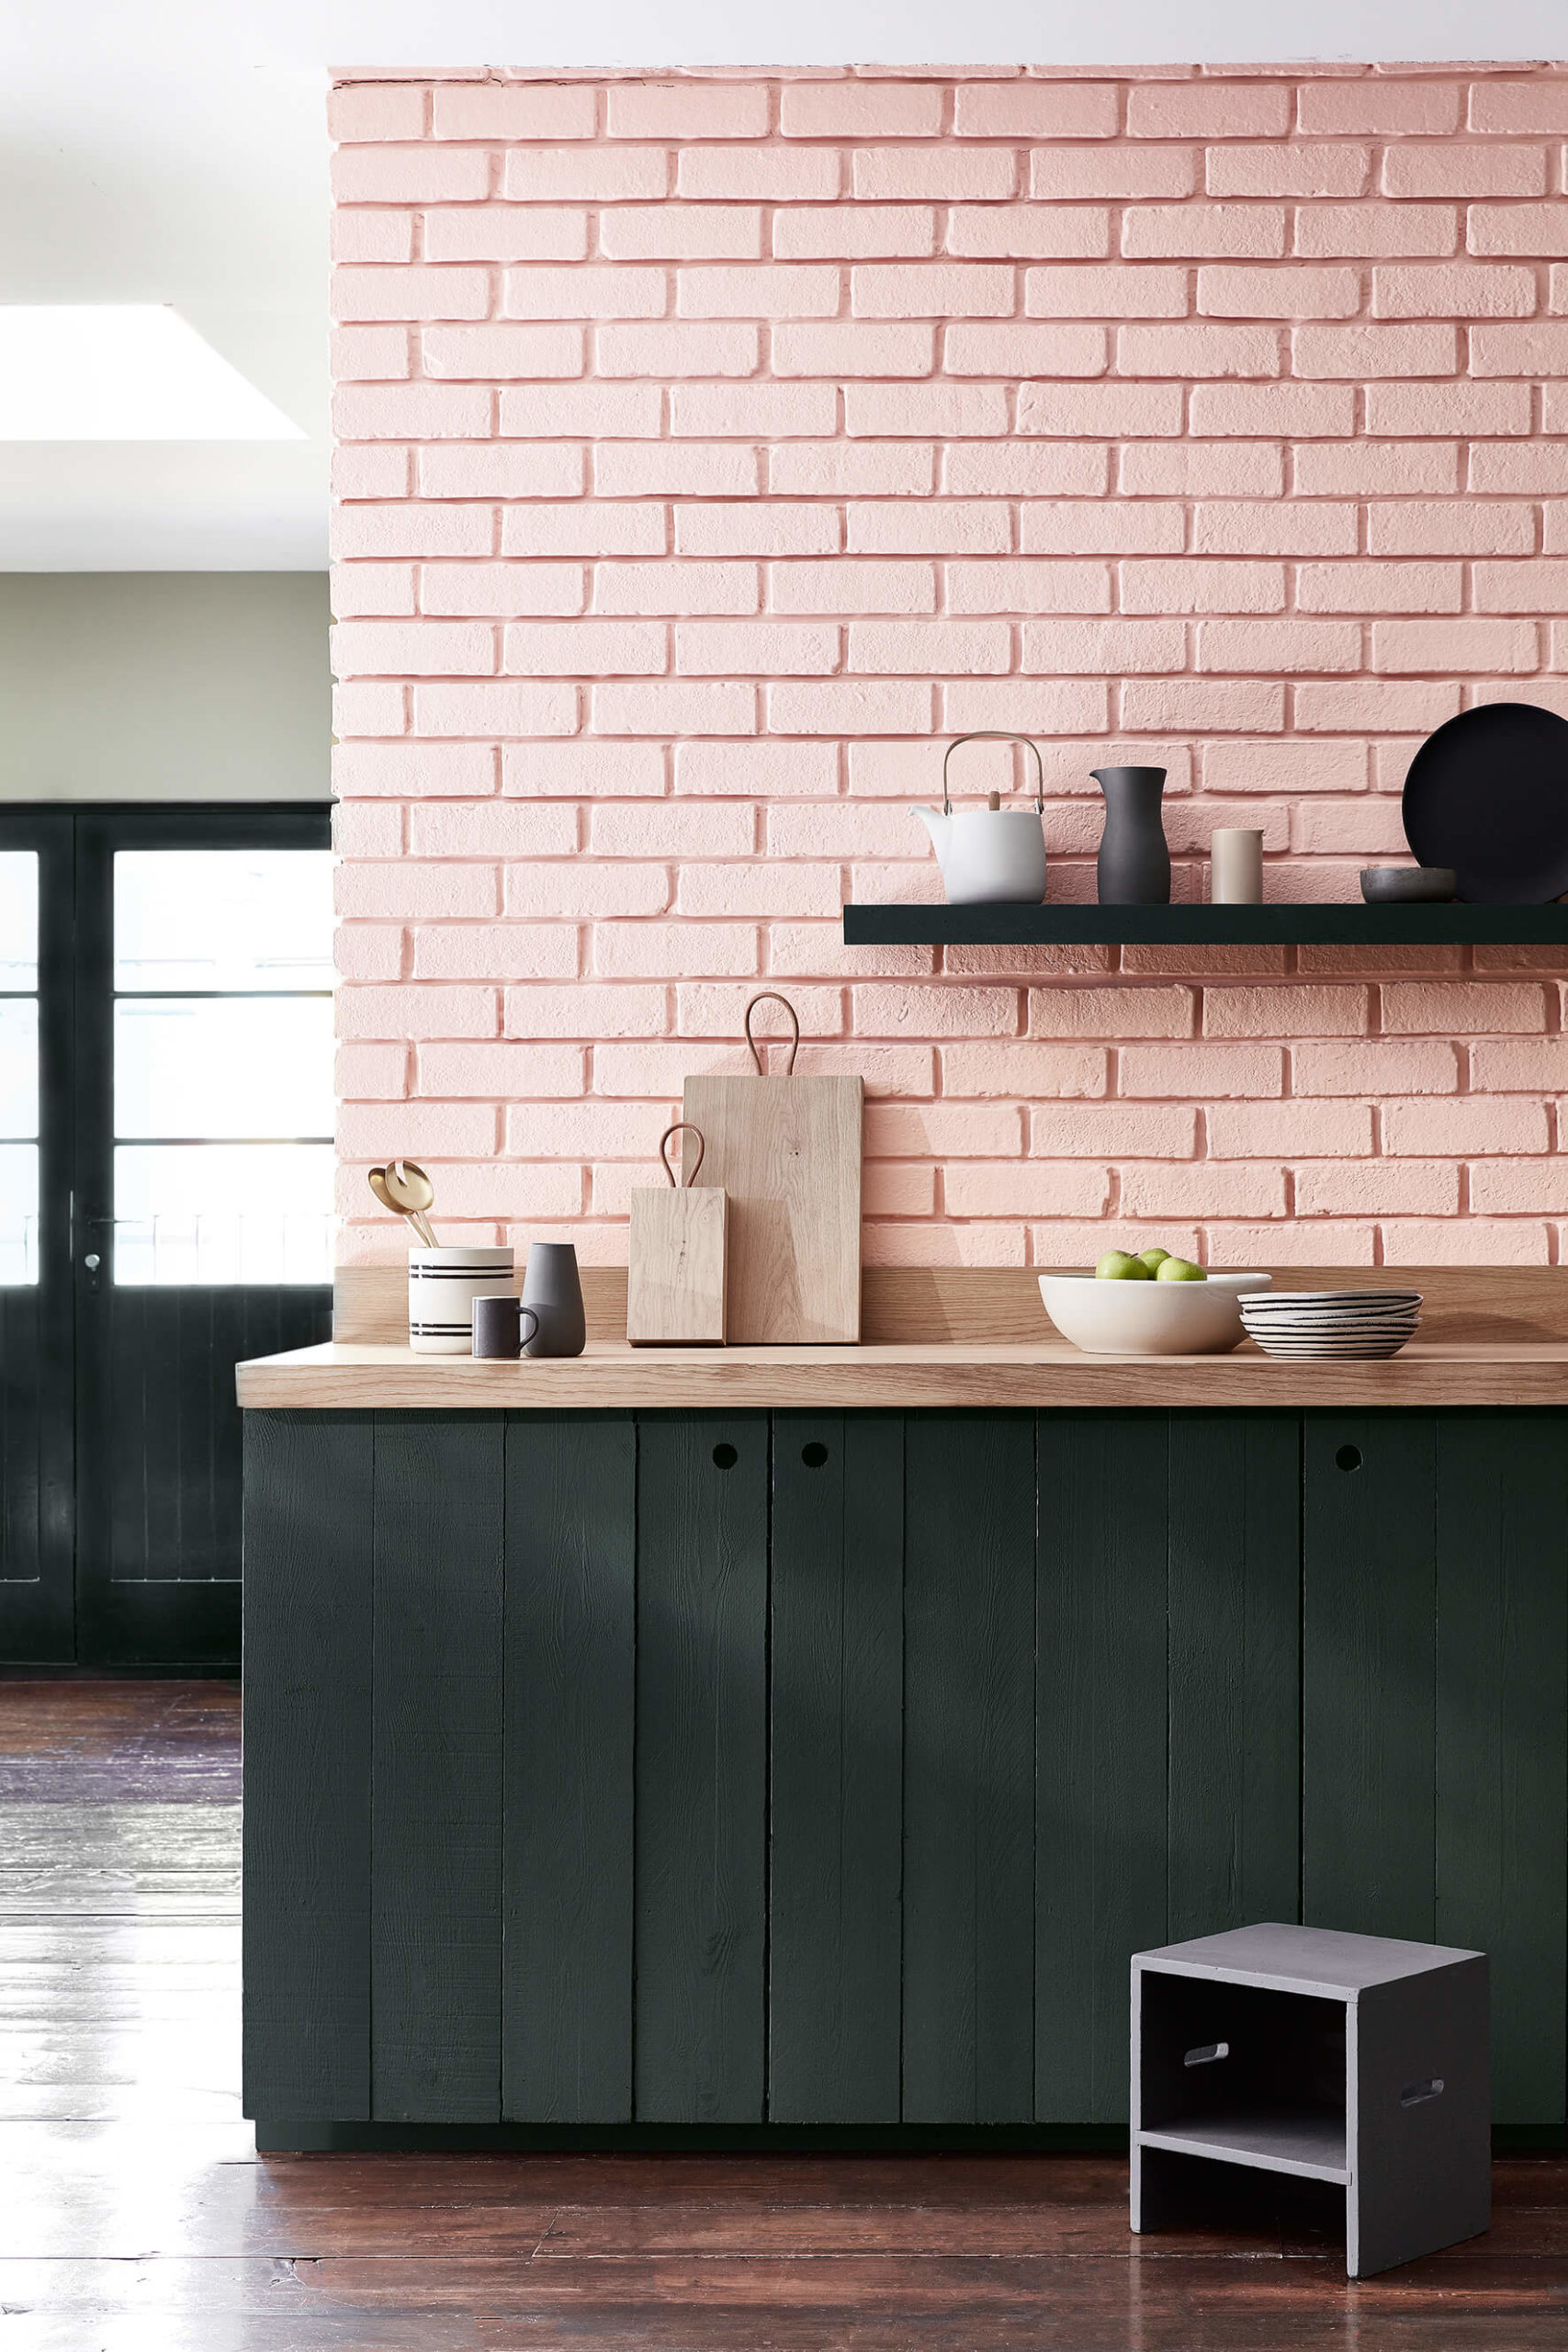 A kitchen with a pastel pink wall (1)